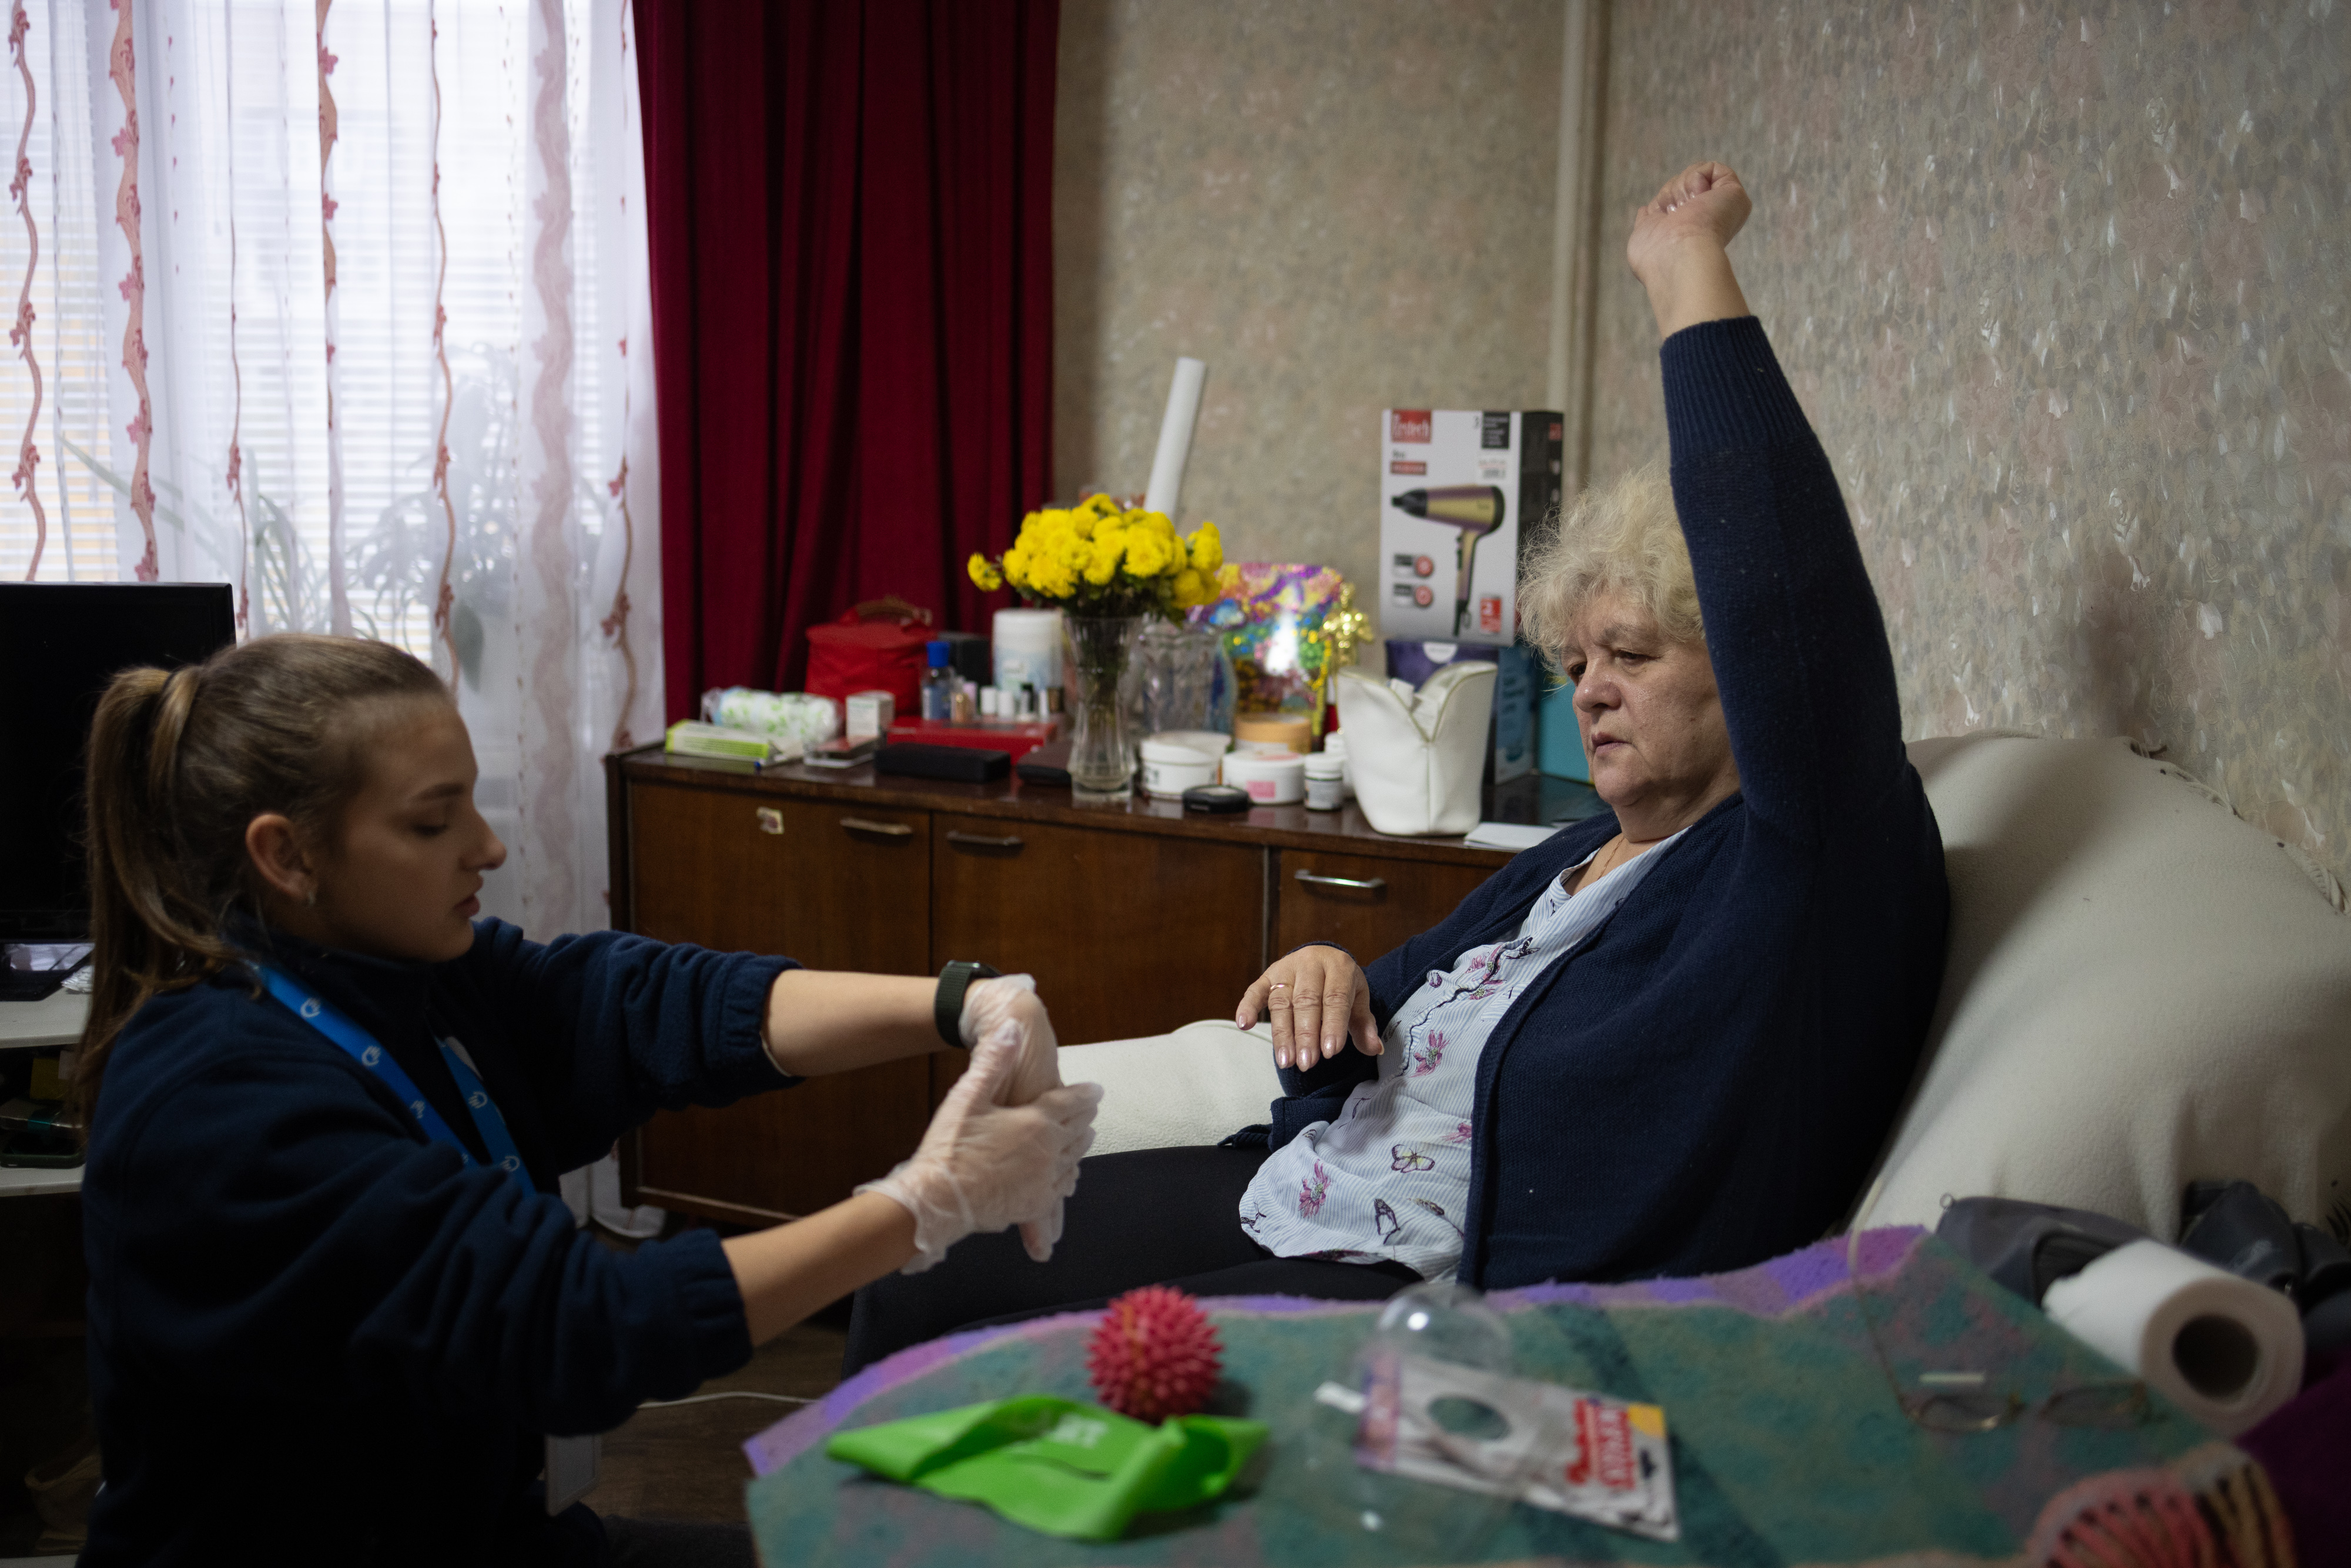 A woman sitted on a sofa making exercise with her arm raised in front of her physiotherapist Maria that is showing us rehabilitation exerices for hands